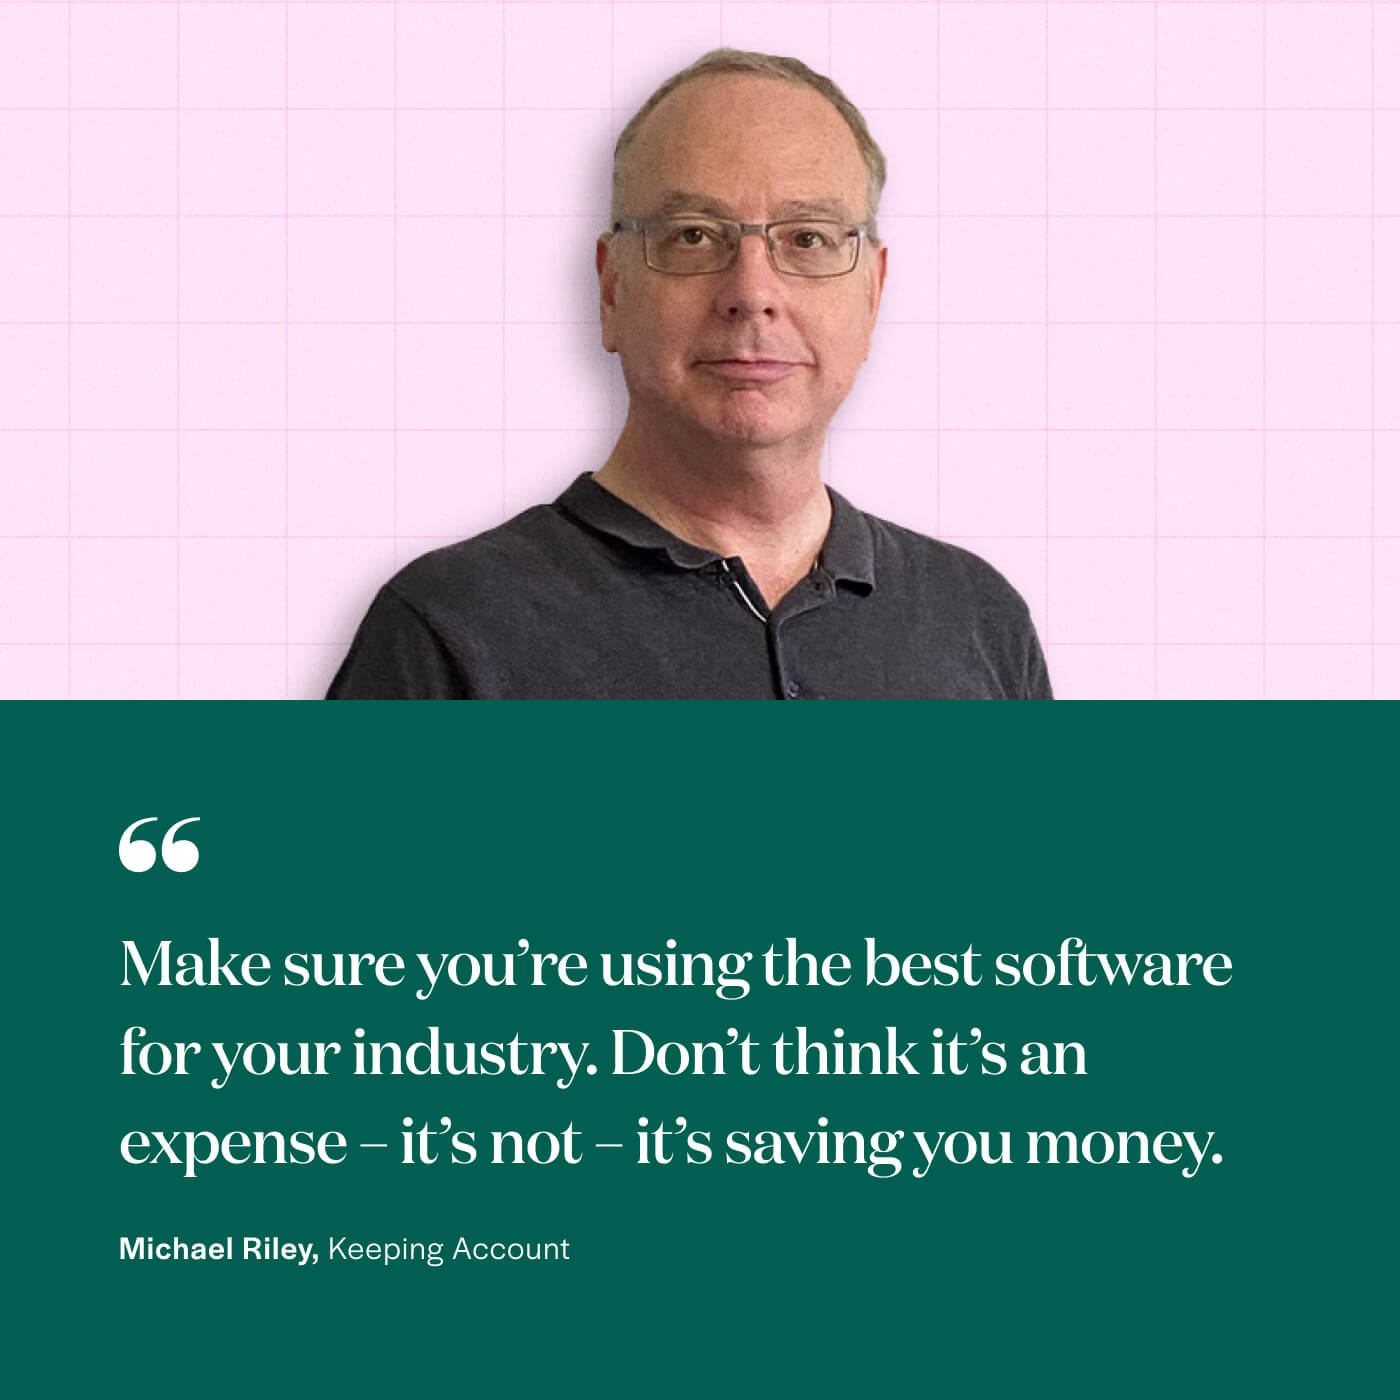 “Make sure you’re using the best software for your industry. Don’t think it’s an expense – it’s not – it’s saving you money.” Michael Riley, Keeping Account